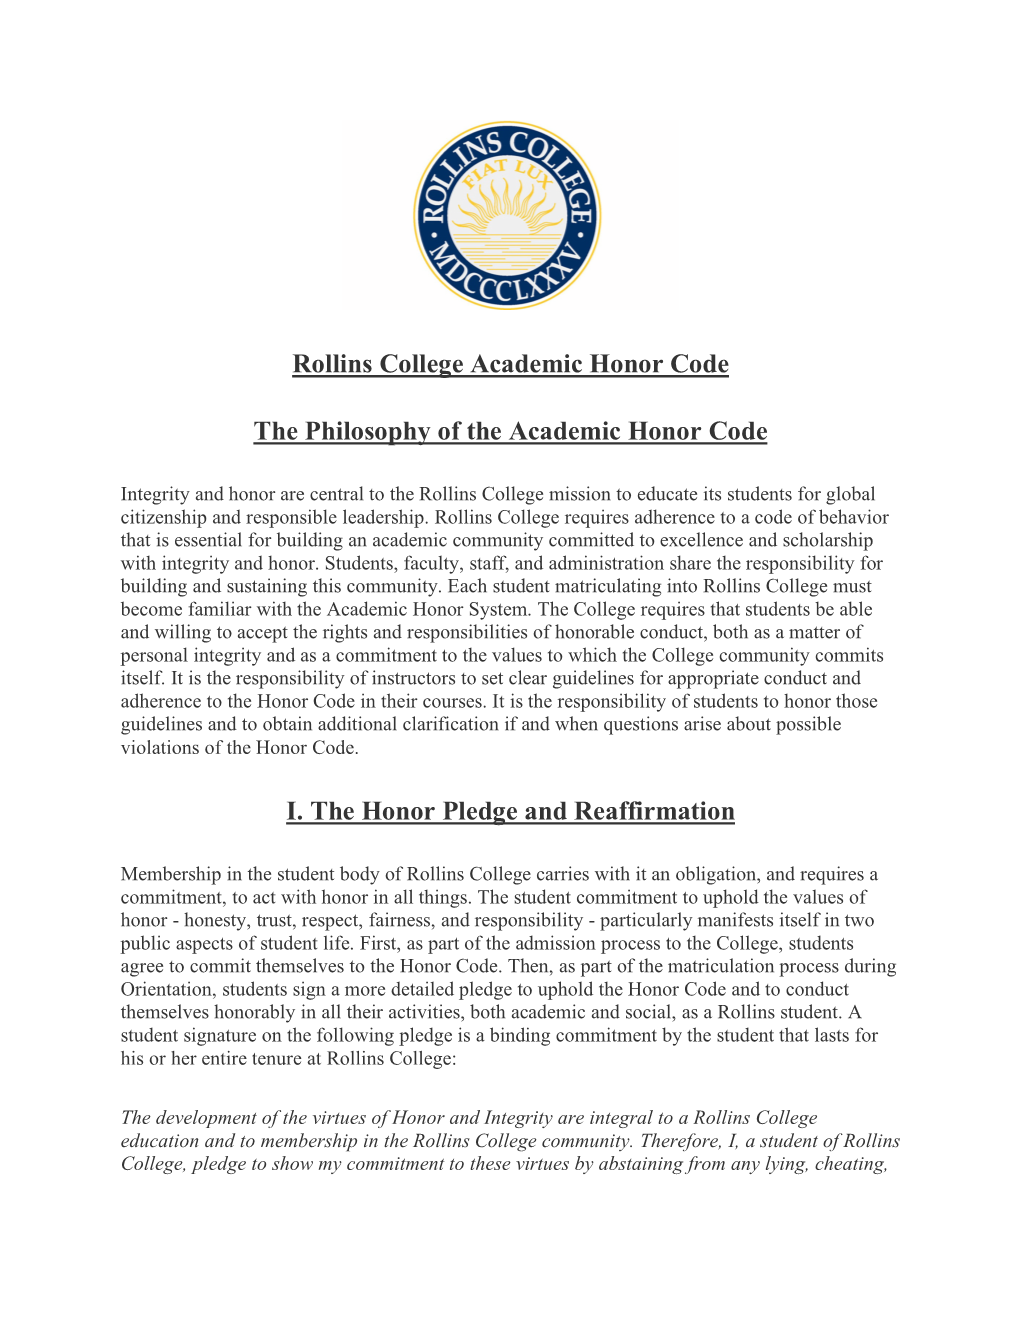 Rollins College Academic Honor Code the Philosophy of the Academic Honor Code I. the Honor Pledge and Reaffirmation